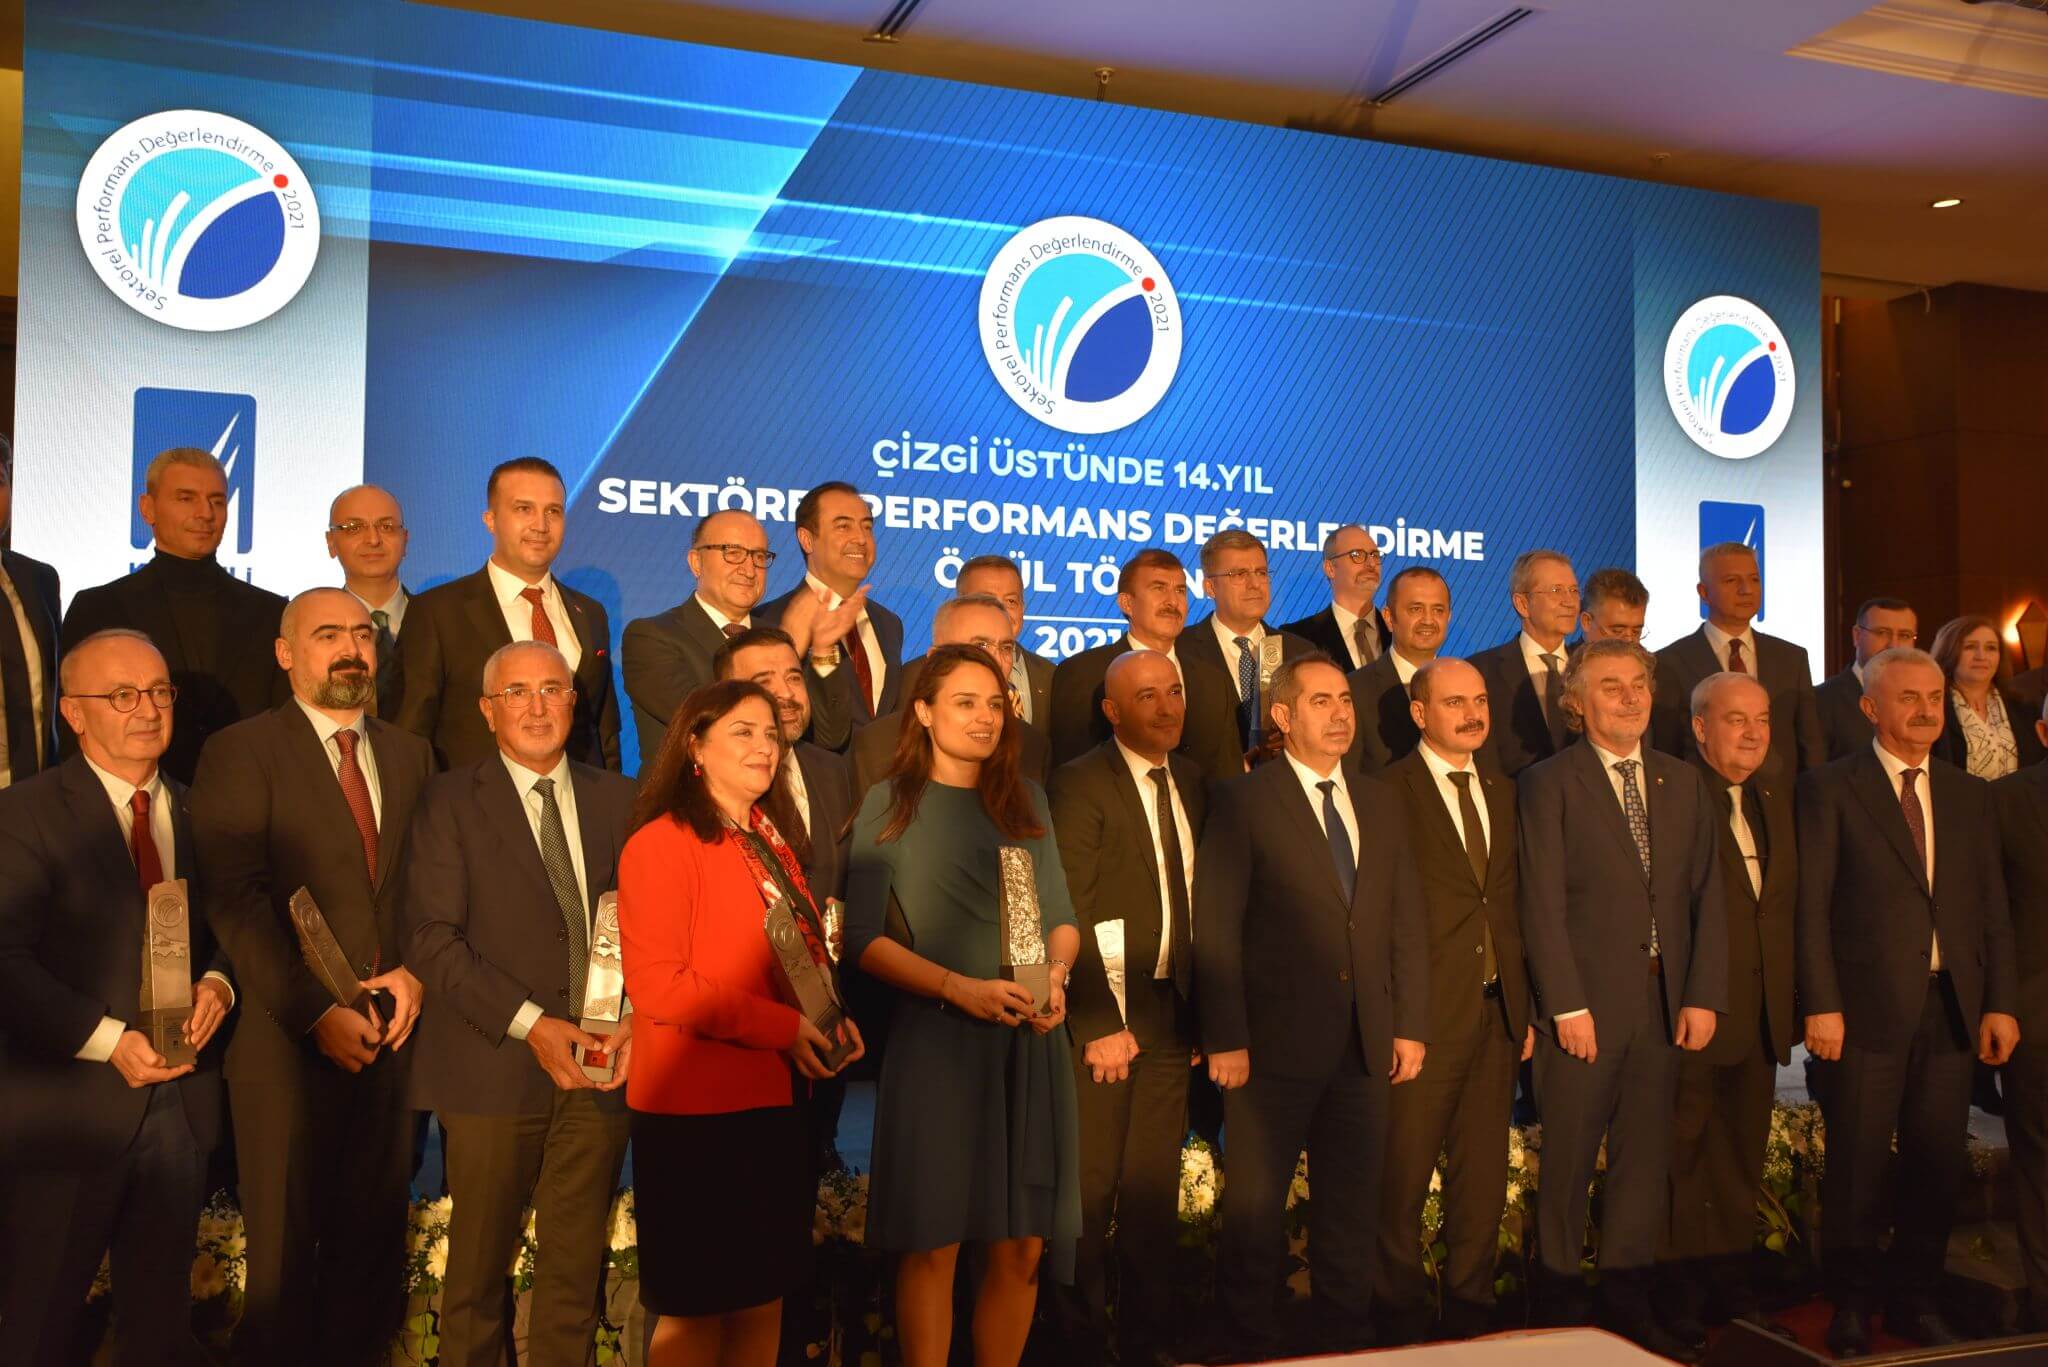 14th Sectoral Performance Award Winners Were Announced